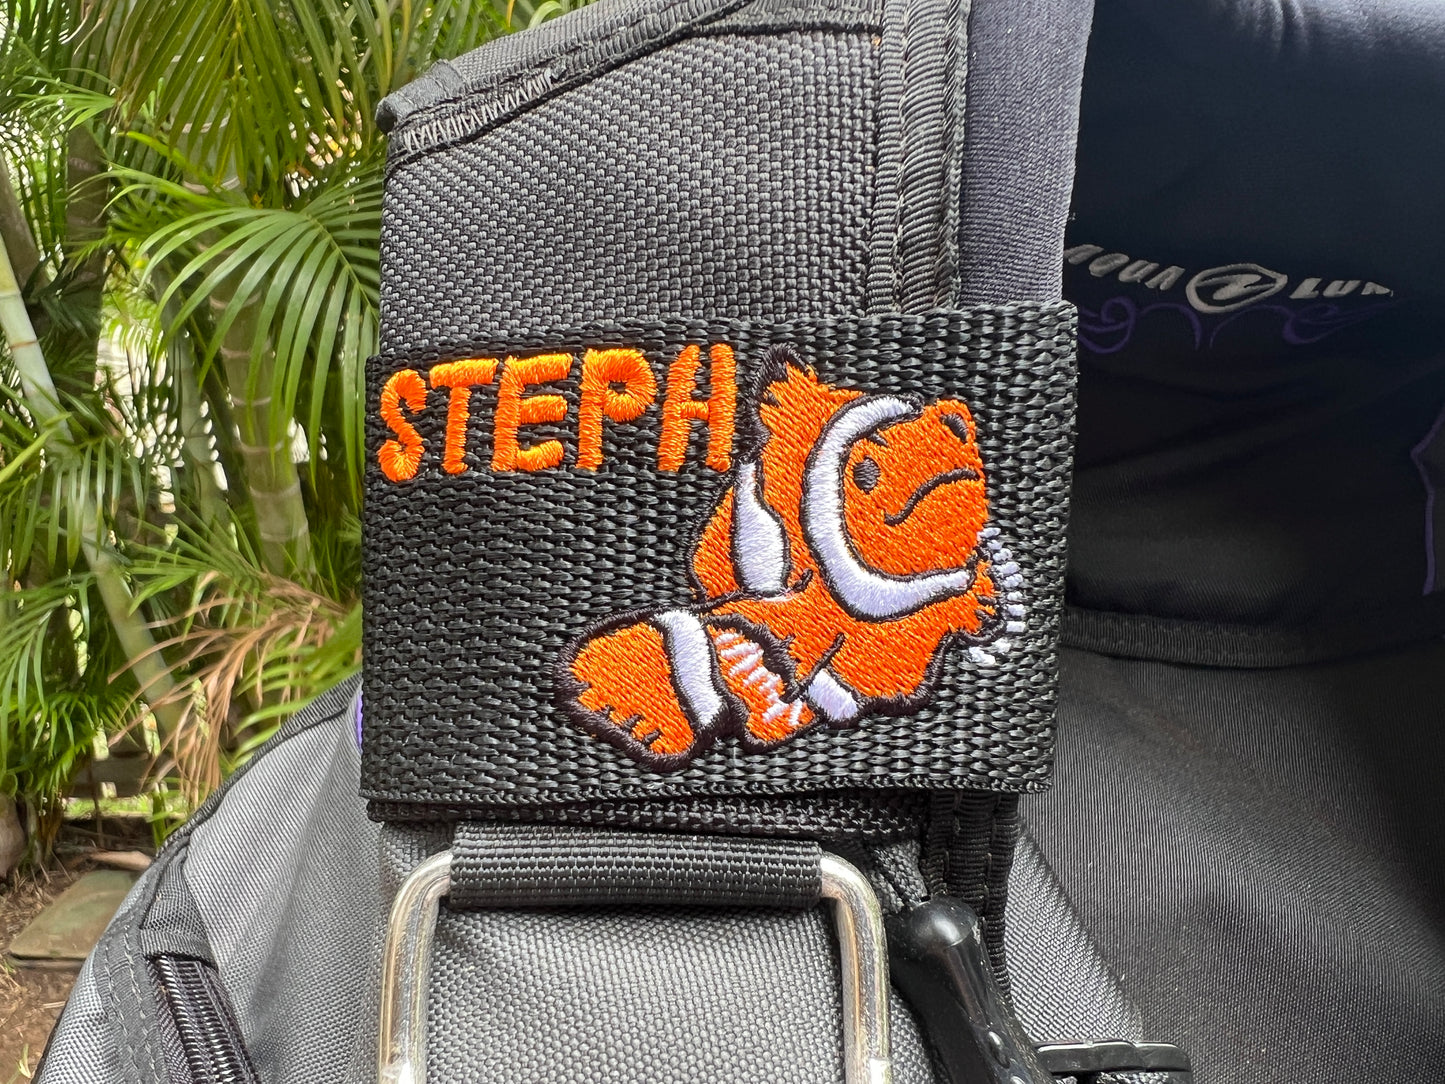 The Clown Fish Personalized & Customizable BCD Identification Tag | Rinn Stitches Creative & Unique Embroidery